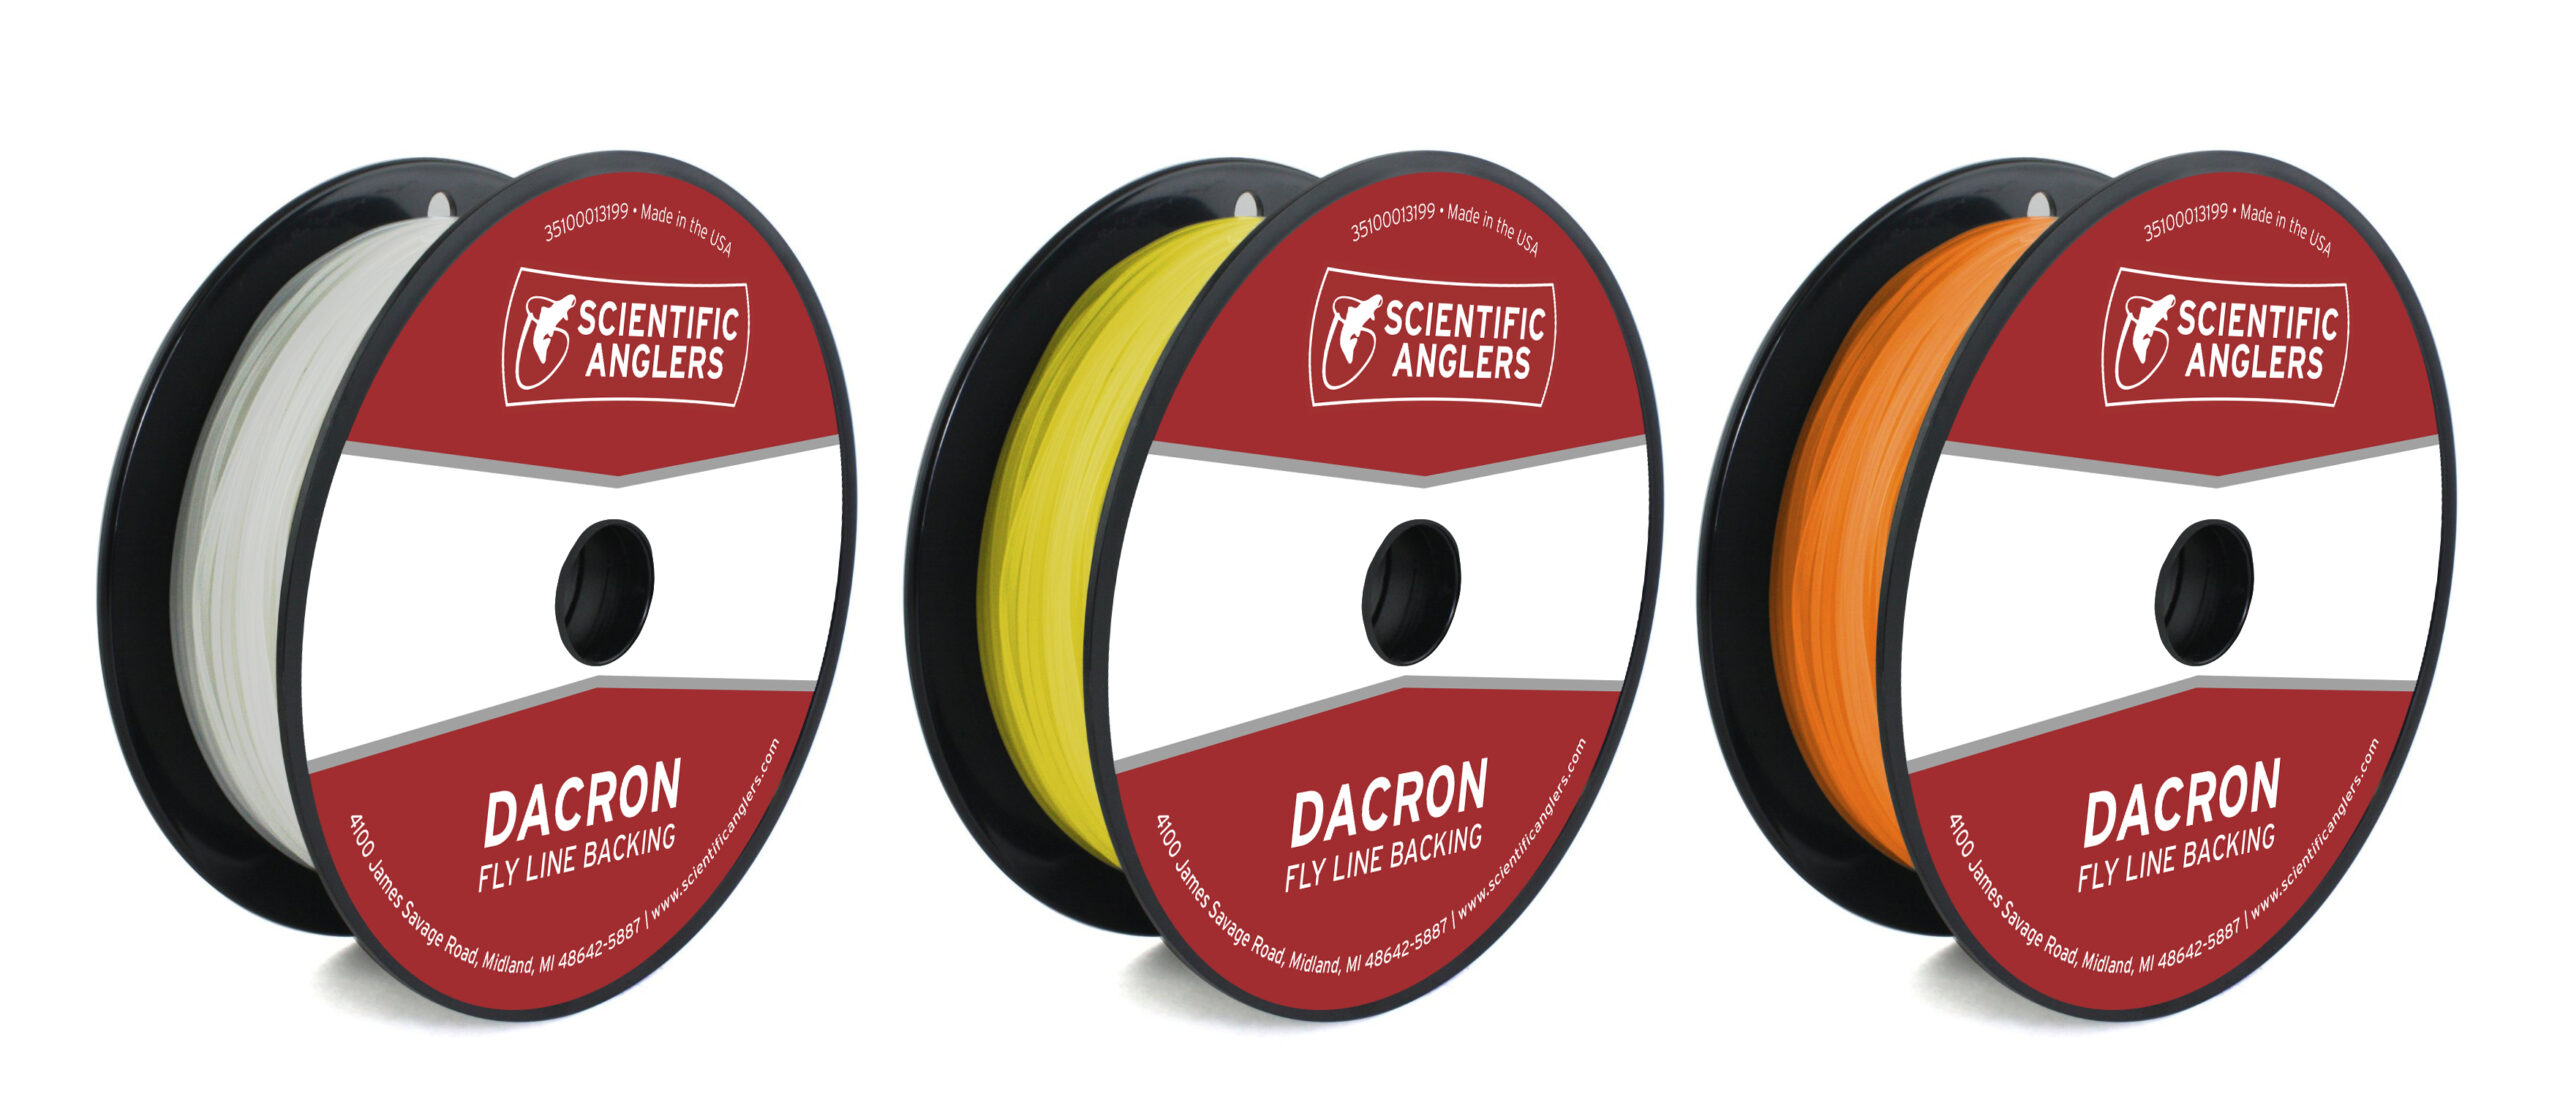 Dacron Backing  Scientific Anglers